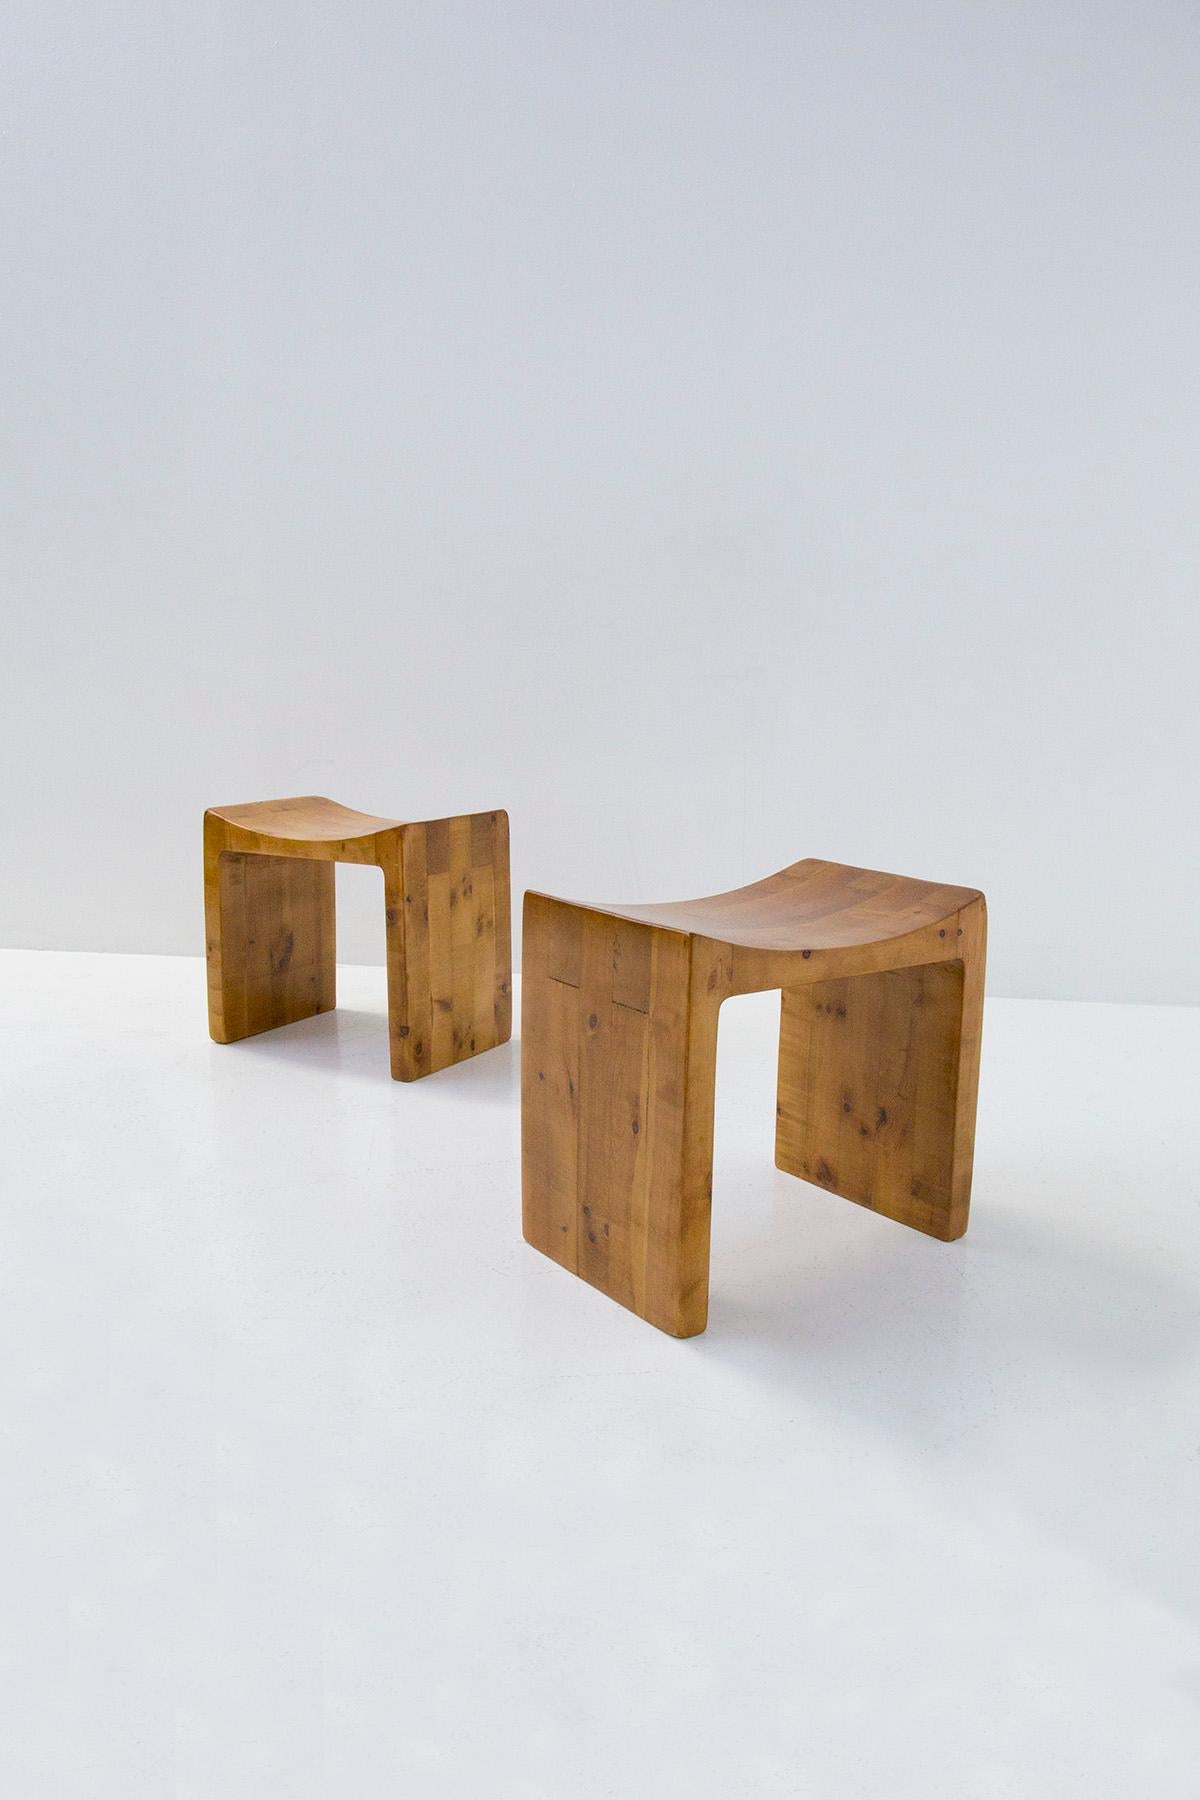 Rare Italian bench by Giuseppe Rivadossi from the 1970s. The bench is made entirely of wood. Its construction is a perfect interlocking of noble wood inserts. Great mastery in woodworking. The bench has a simple but at the same time imposing shape